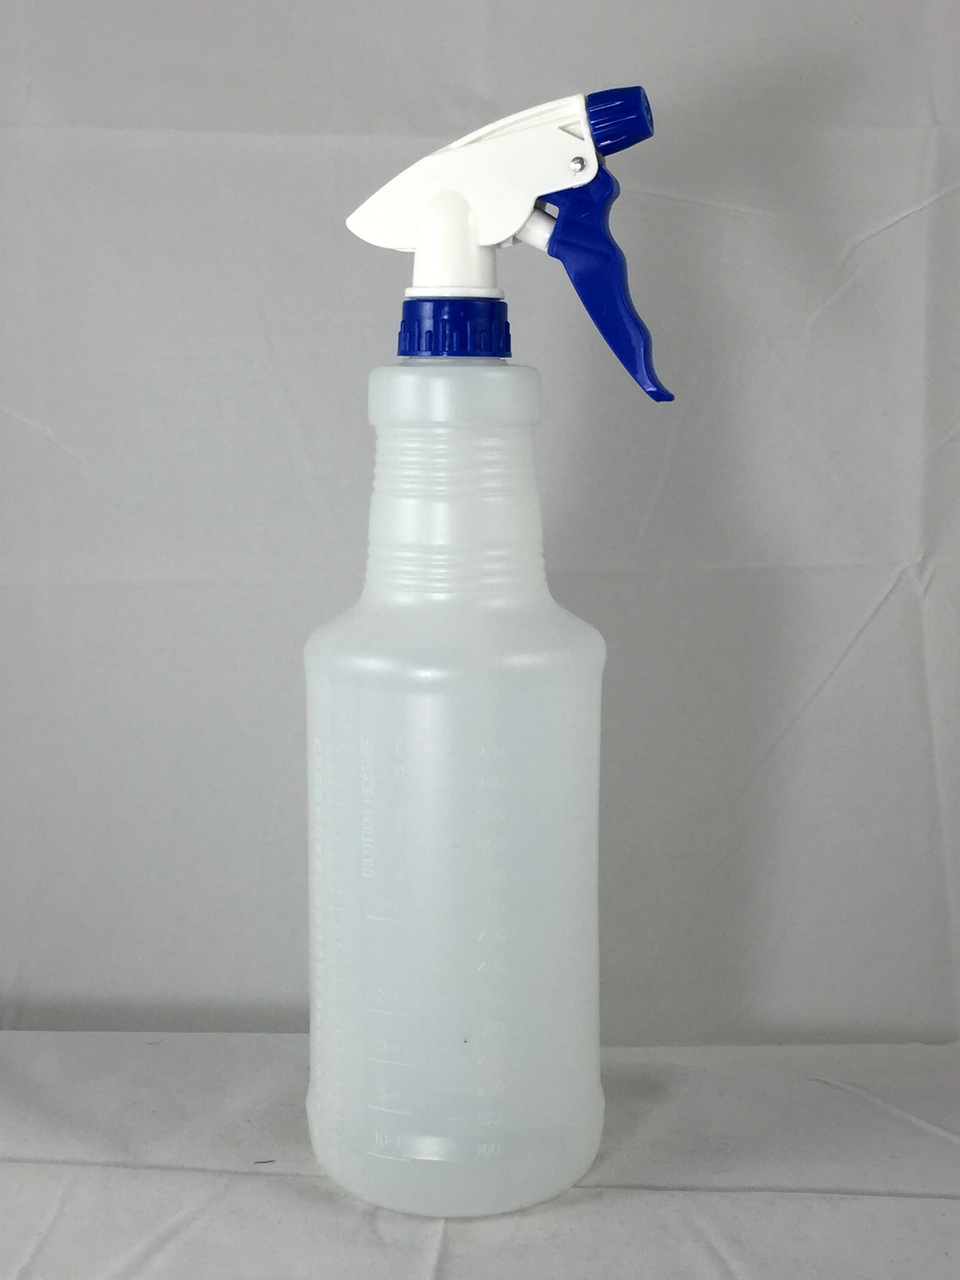 1-Quart Spray Bottle Questions & Answers